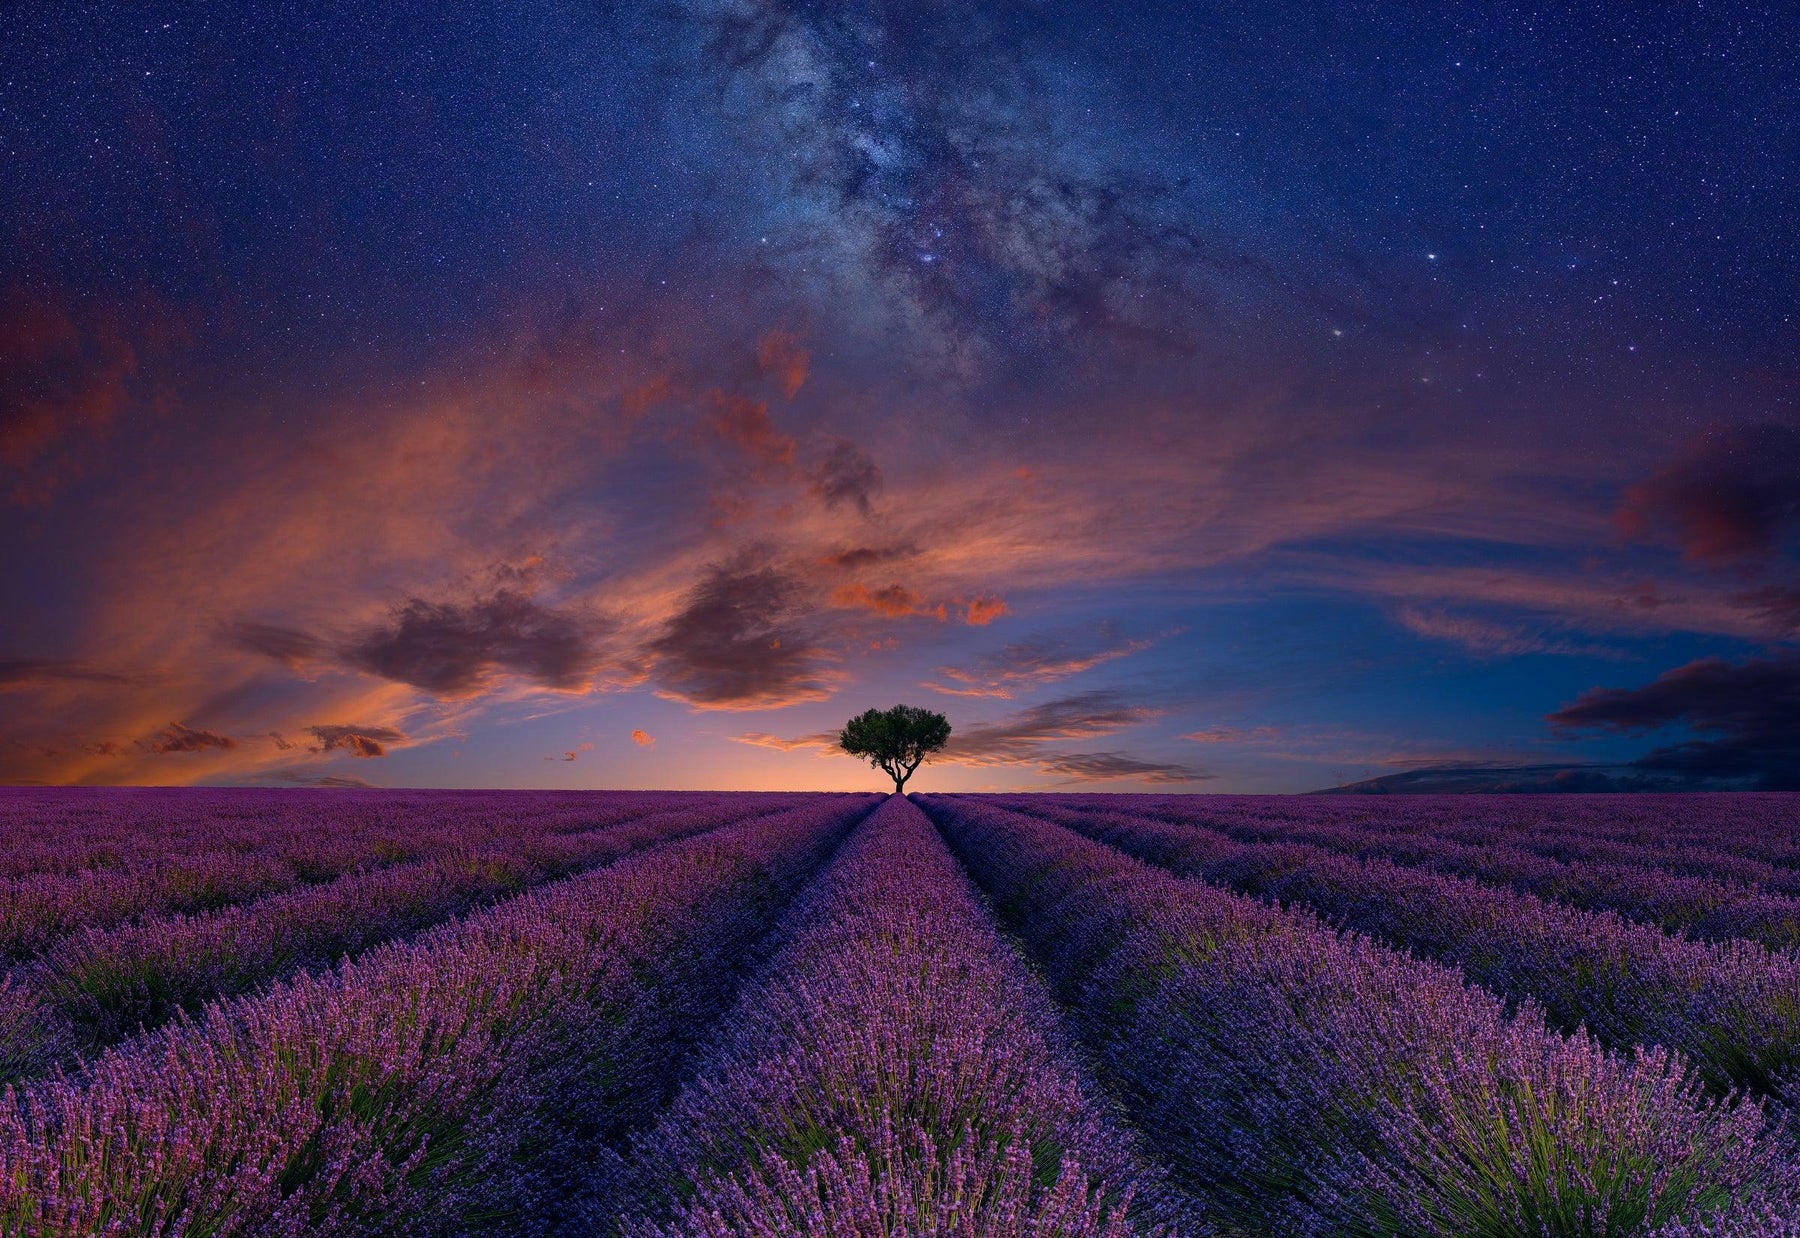 Single tree in the middle of rows of purple lavender under a cloudy sky filled with stars and the milky way